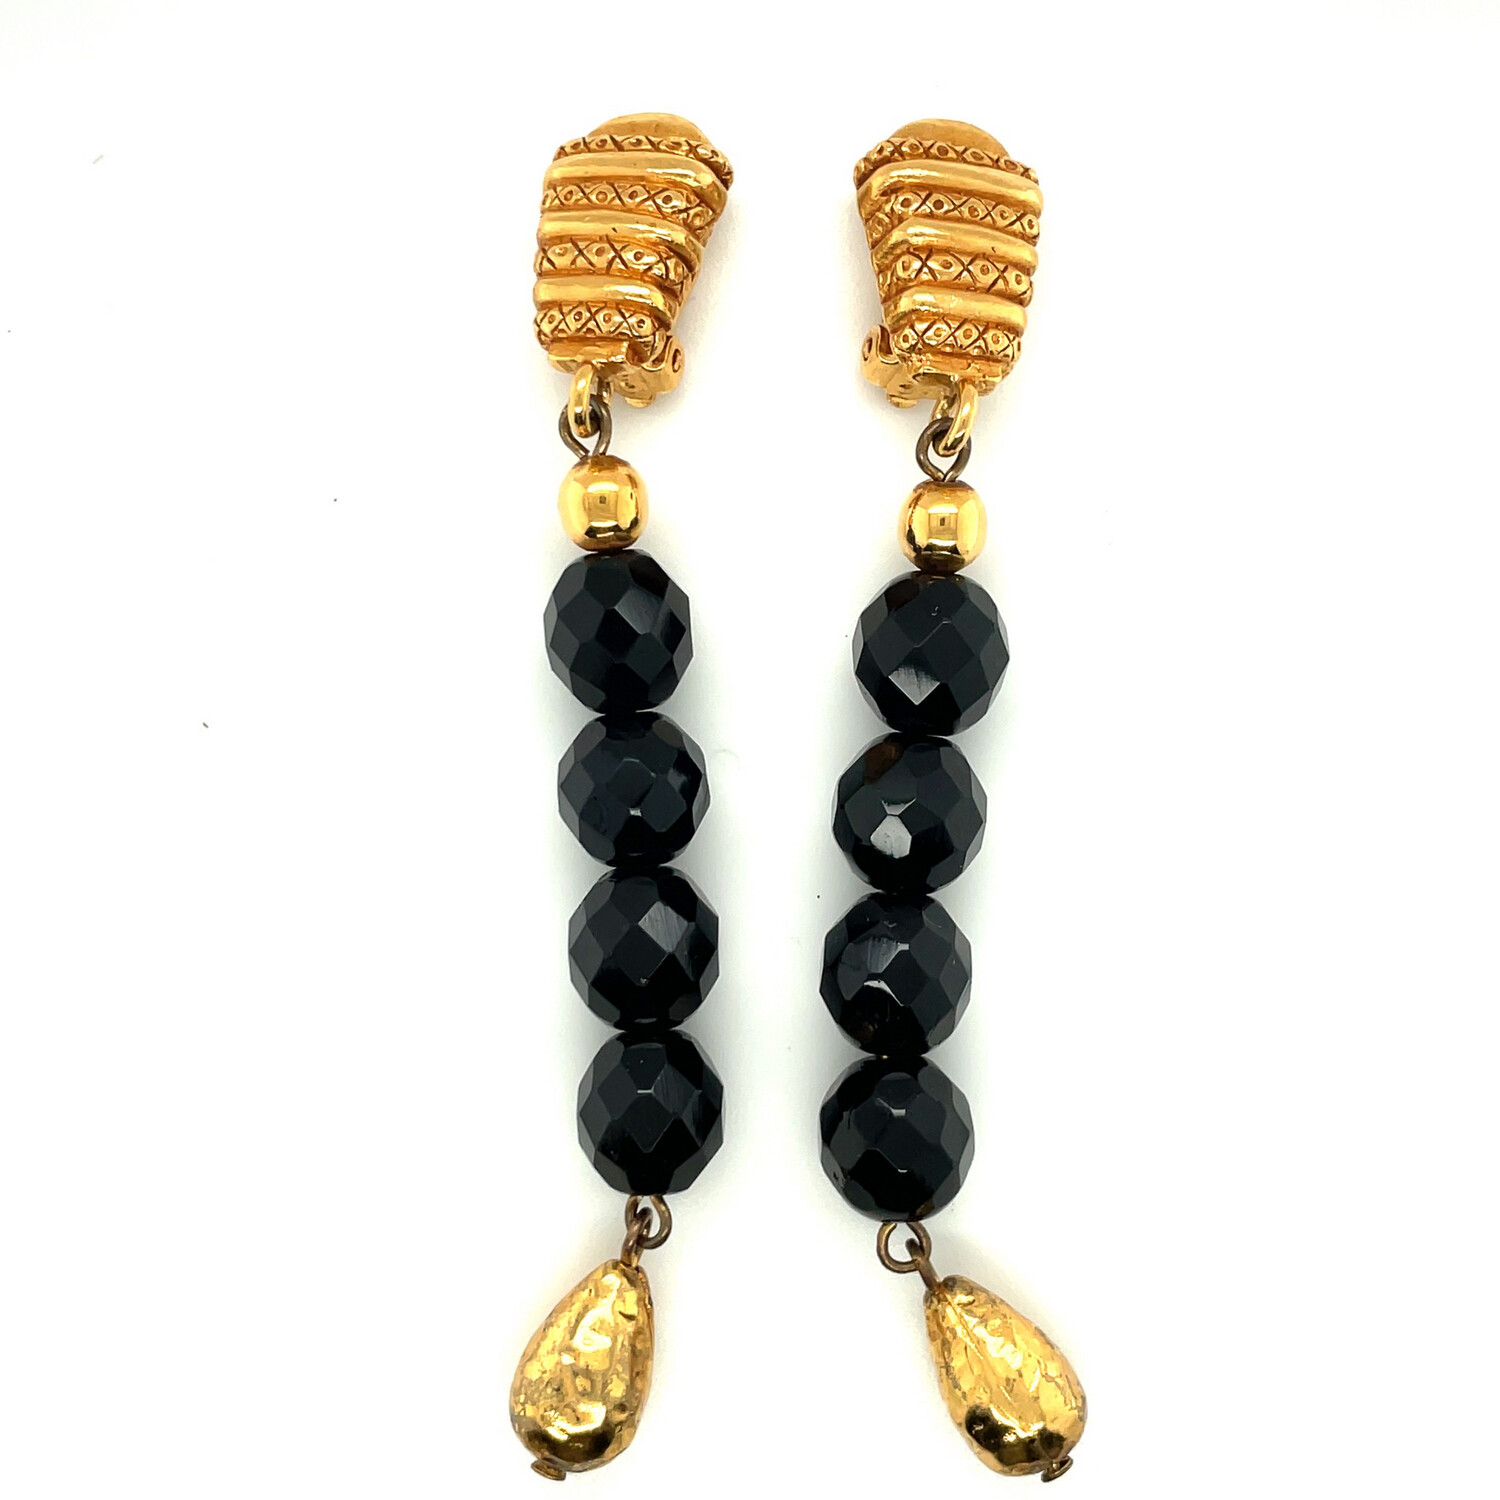 Christian Dior Boutique Black Earrings 1980’s